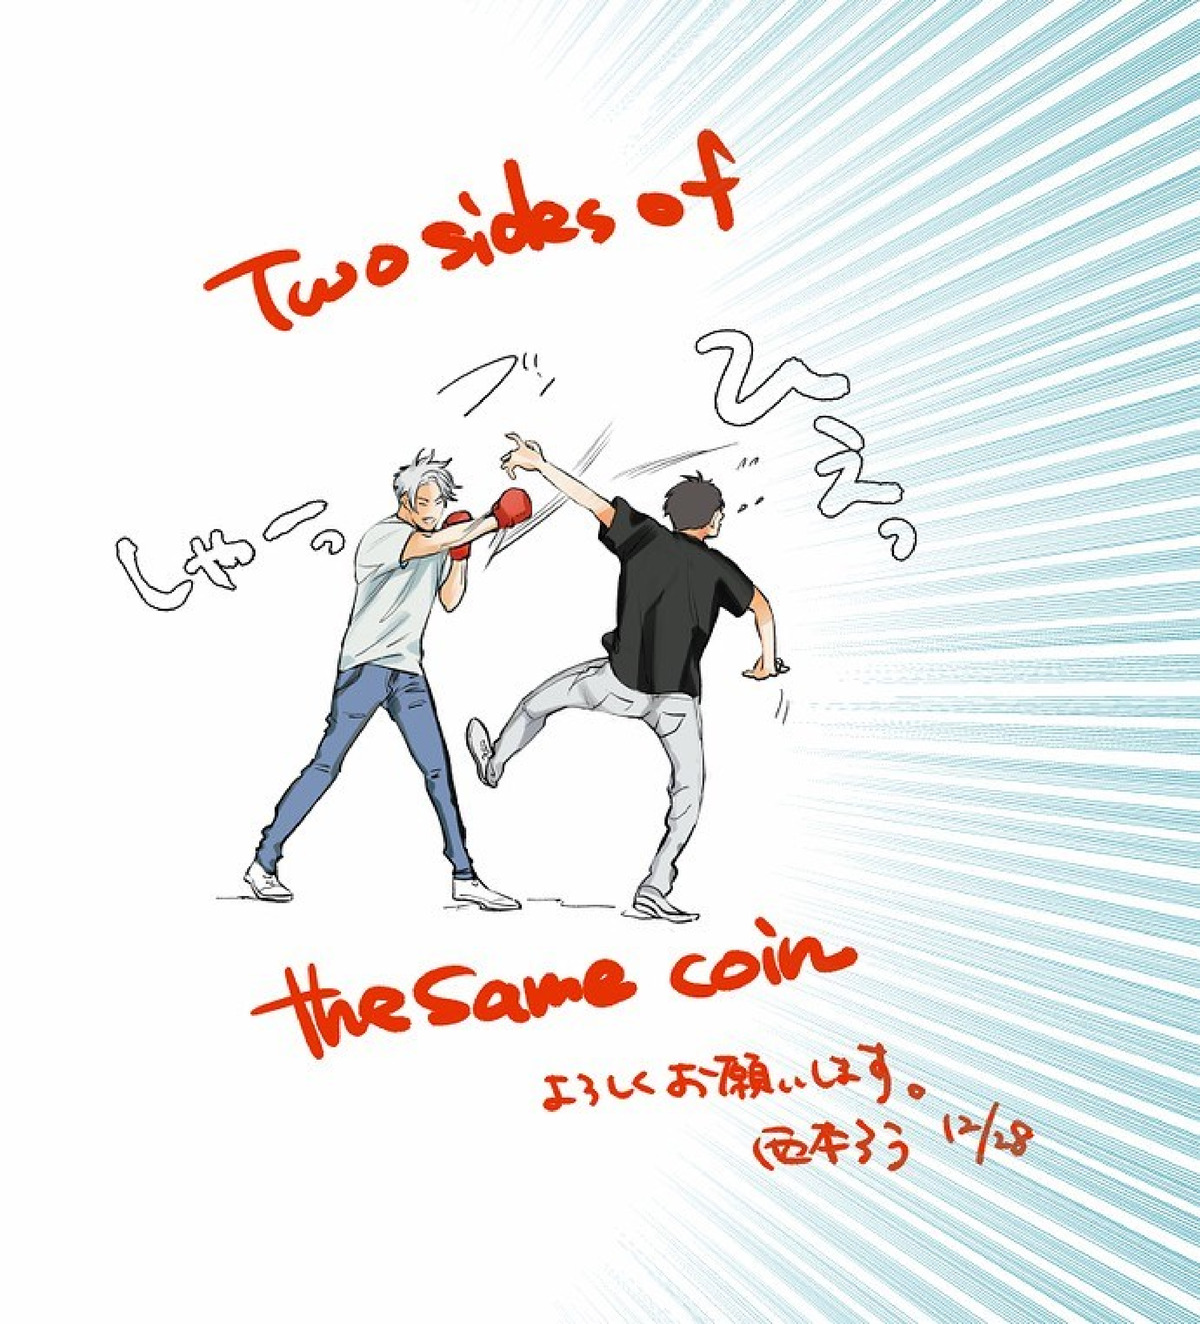 【Two sides of the same coin[耽美]】漫画-（上卷01-02）章节漫画下拉式图片-59.jpg